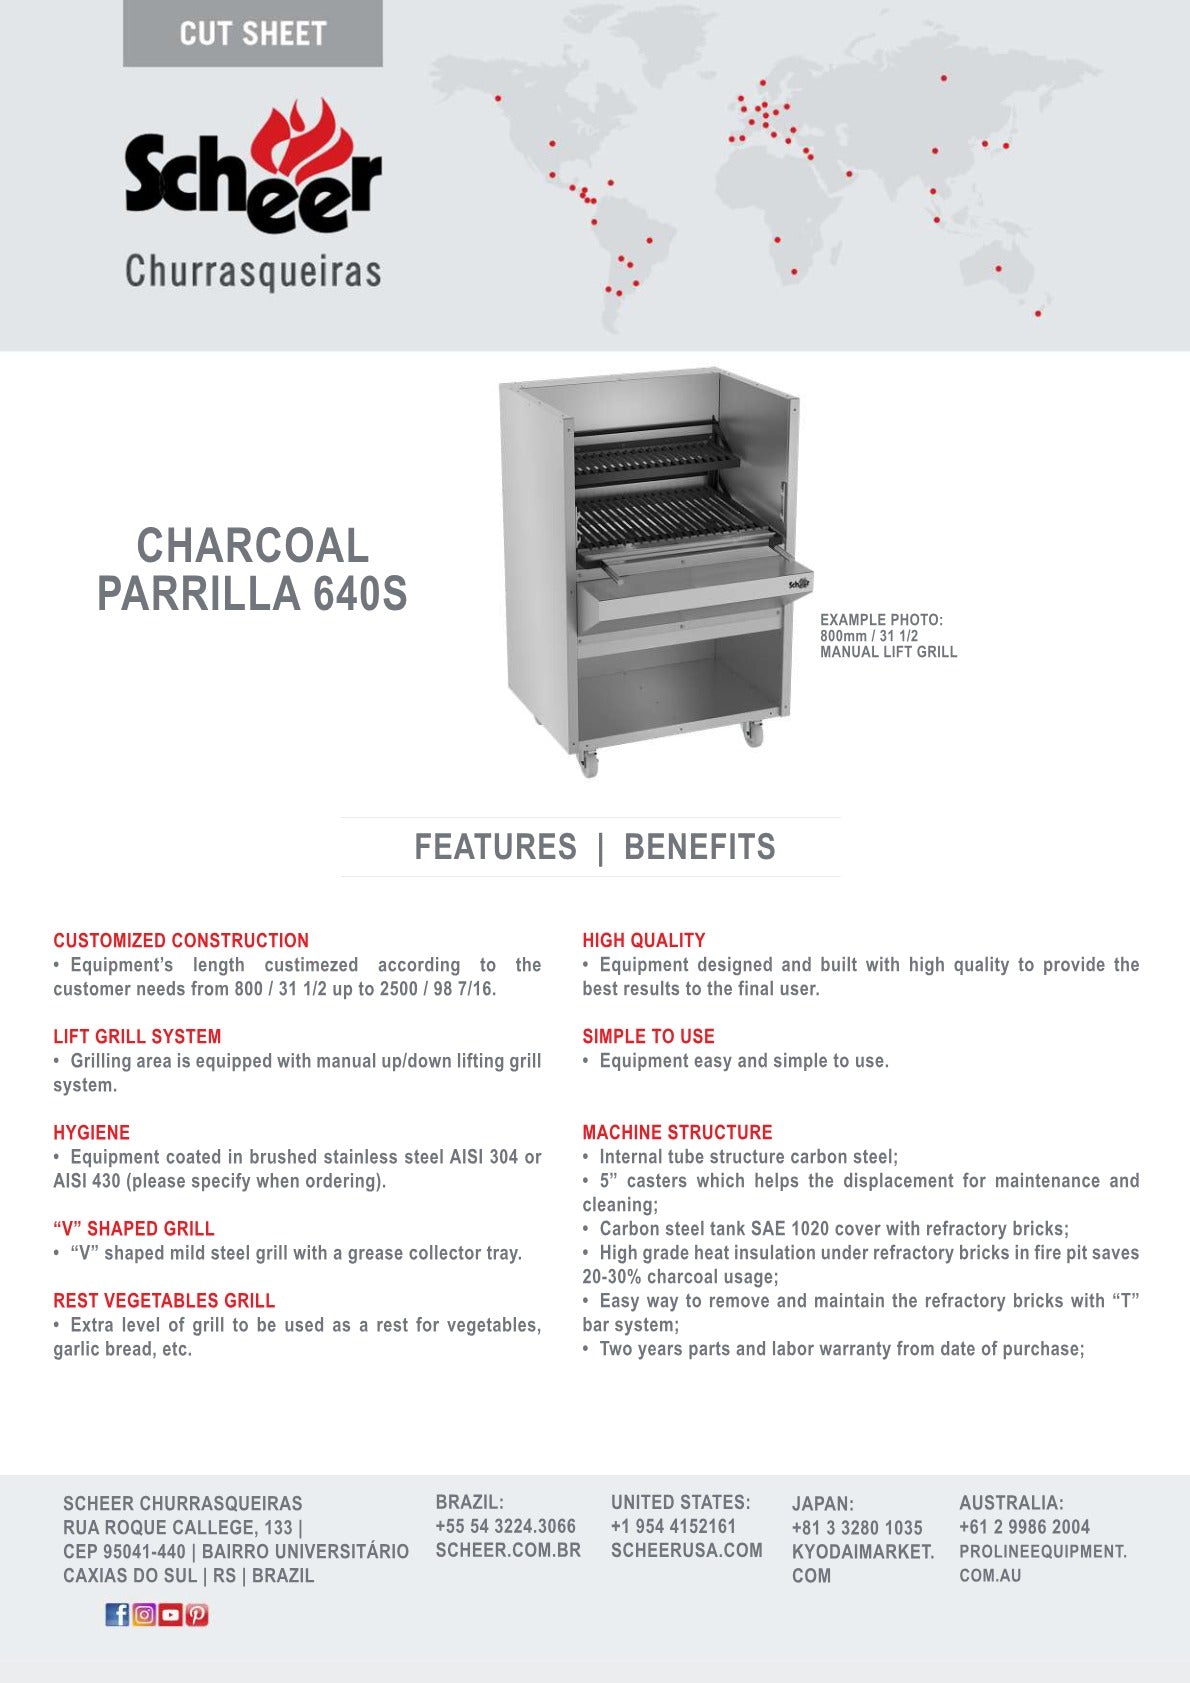 Thumbnail - Scheer Proline Parrilla 640 - 1800mm Charcoal/Wood Double Lifter Grill